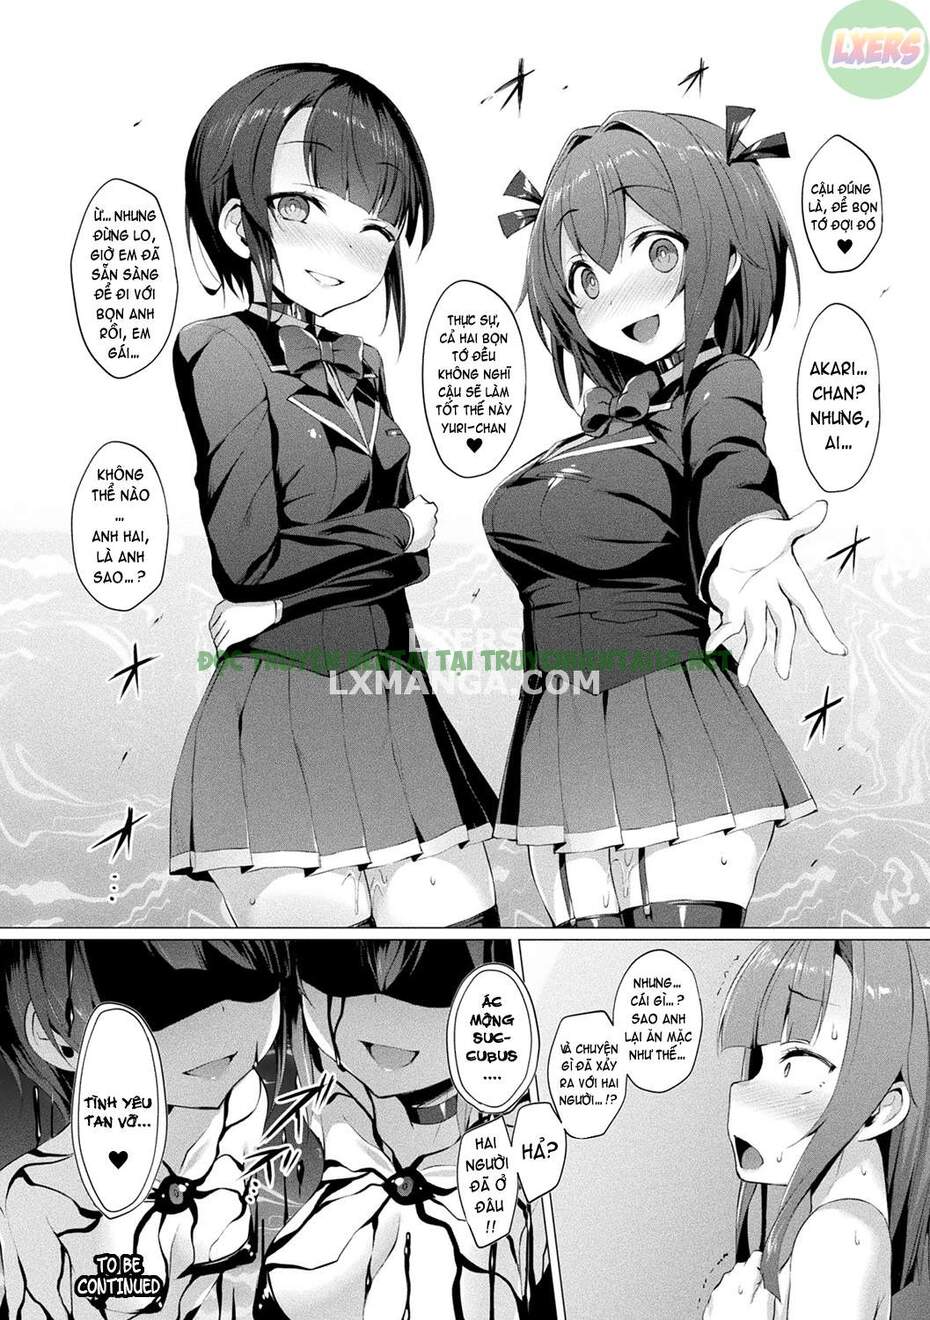 Xem ảnh The Archangel Of Love, Love Mary - Chapter 5 - 12 - Hentai24h.Tv